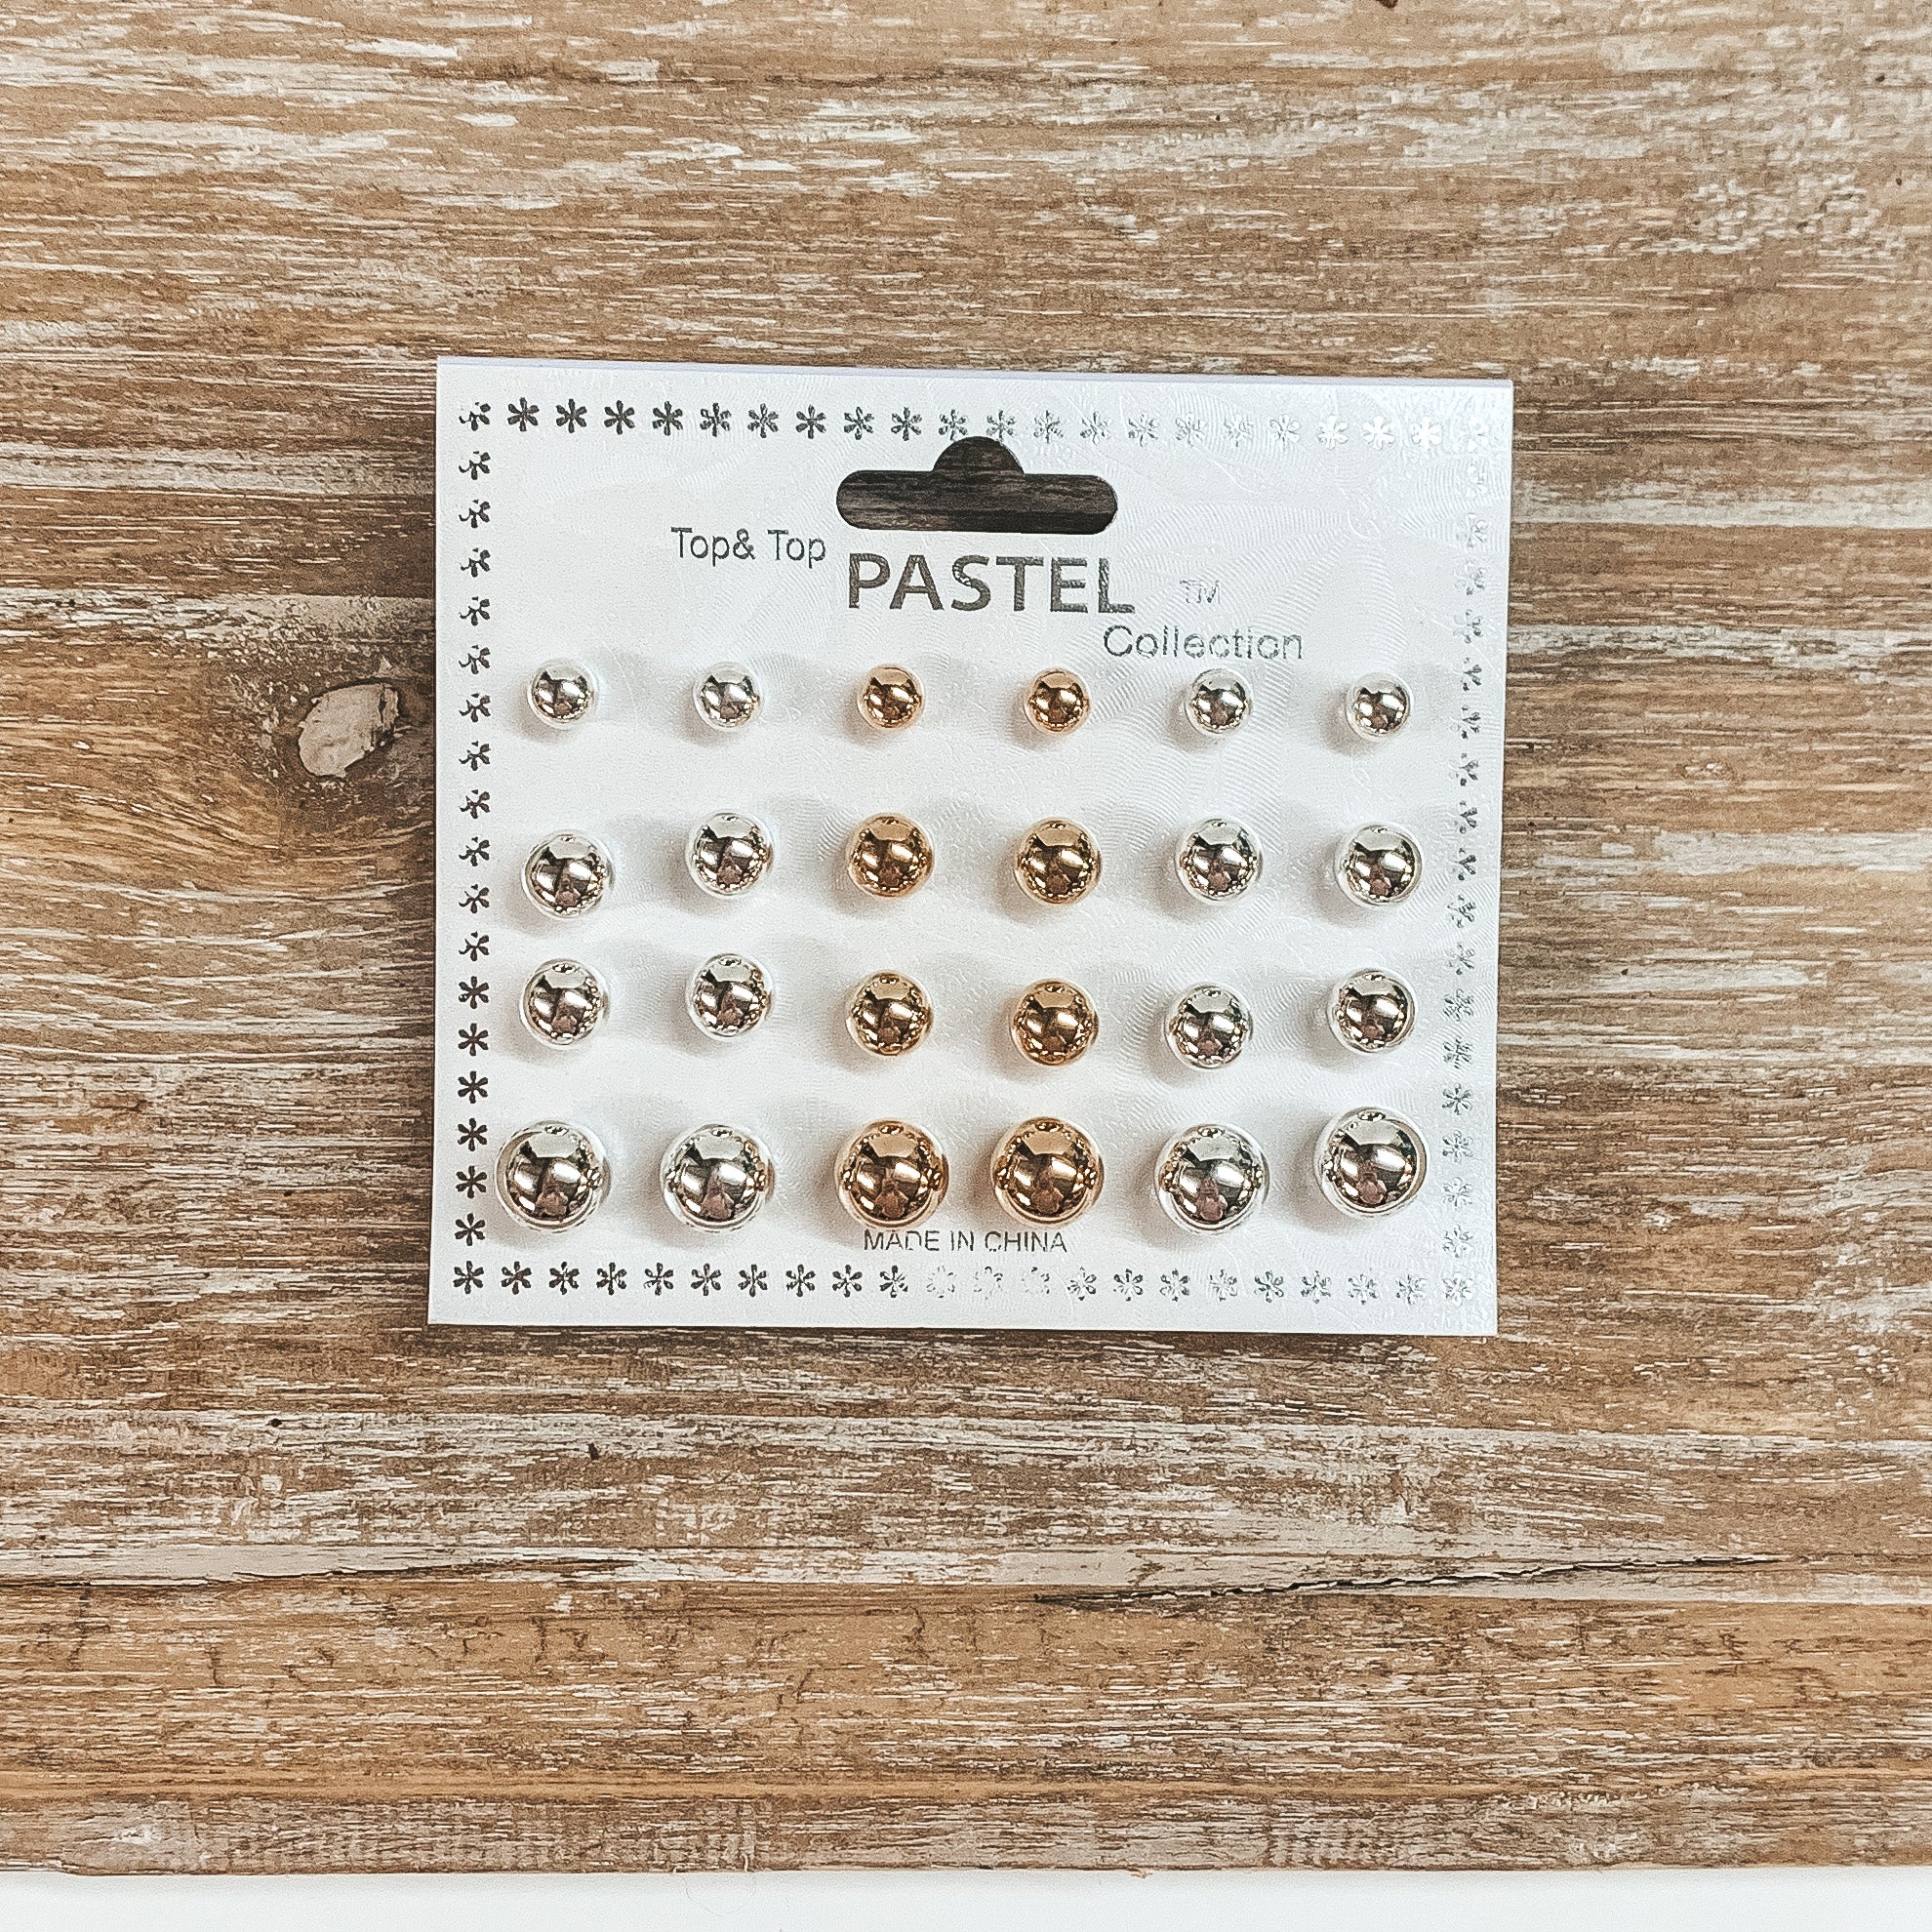 This is a pack of twelve circle stud earrings in different sizes and colors such as gold and silver. These earrings are placed on a white earring card holder and laying on a wooden slate.